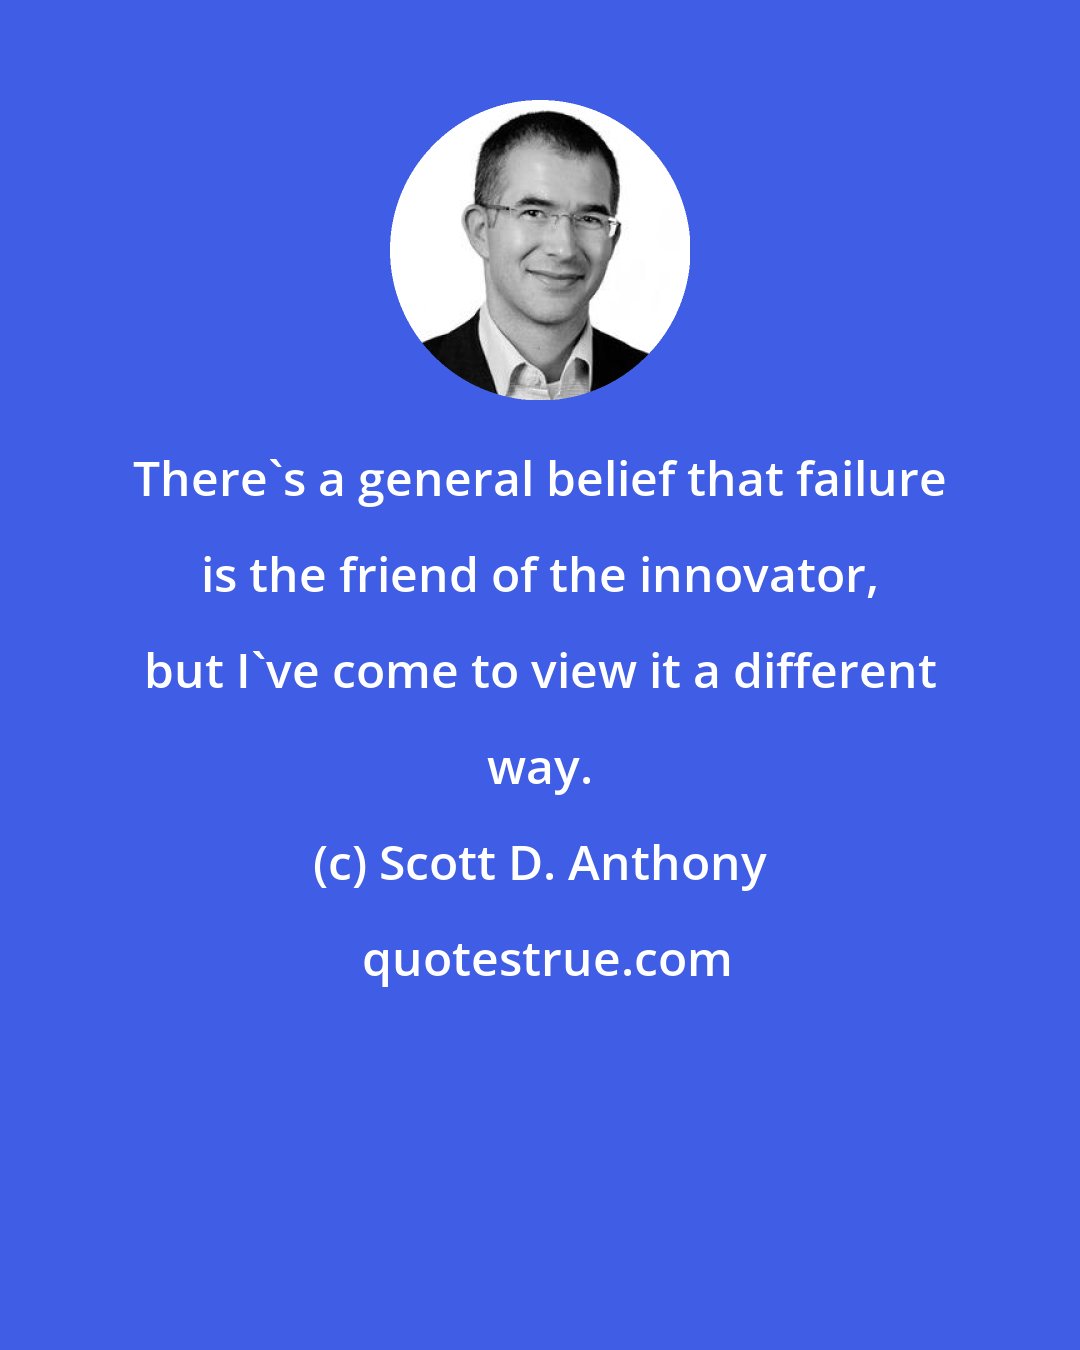 Scott D. Anthony: There's a general belief that failure is the friend of the innovator, but I've come to view it a different way.